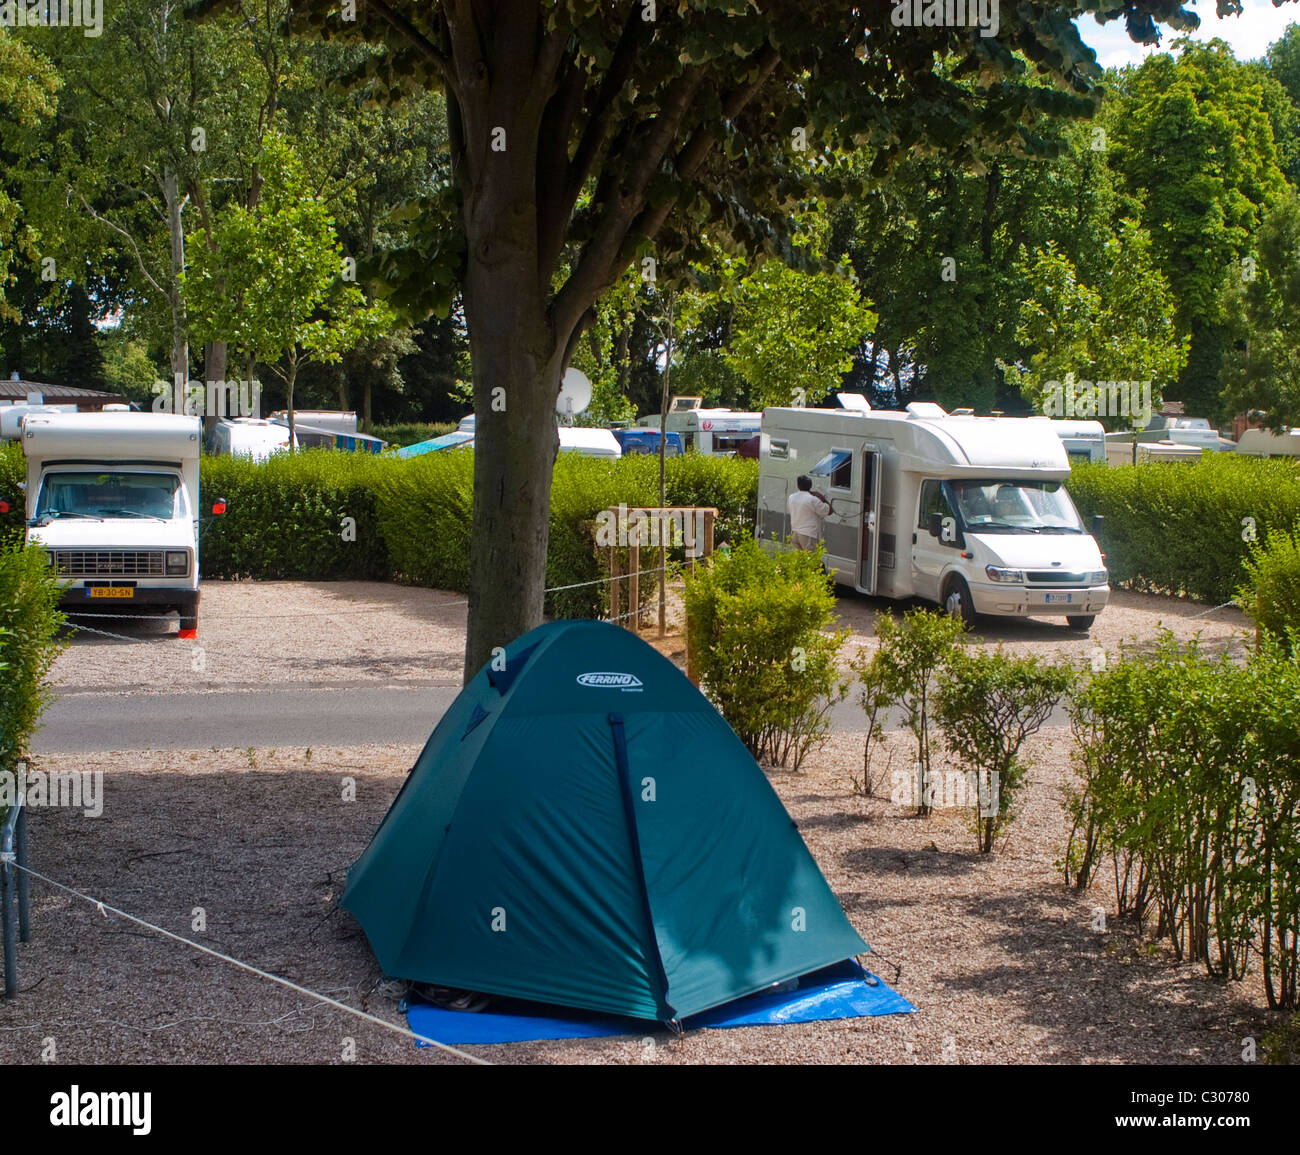 Paris, France, Tourist Camp in Woods Campground, Bois du Boulogne. "Camping  in France" Family Tents Stock Photo - Alamy